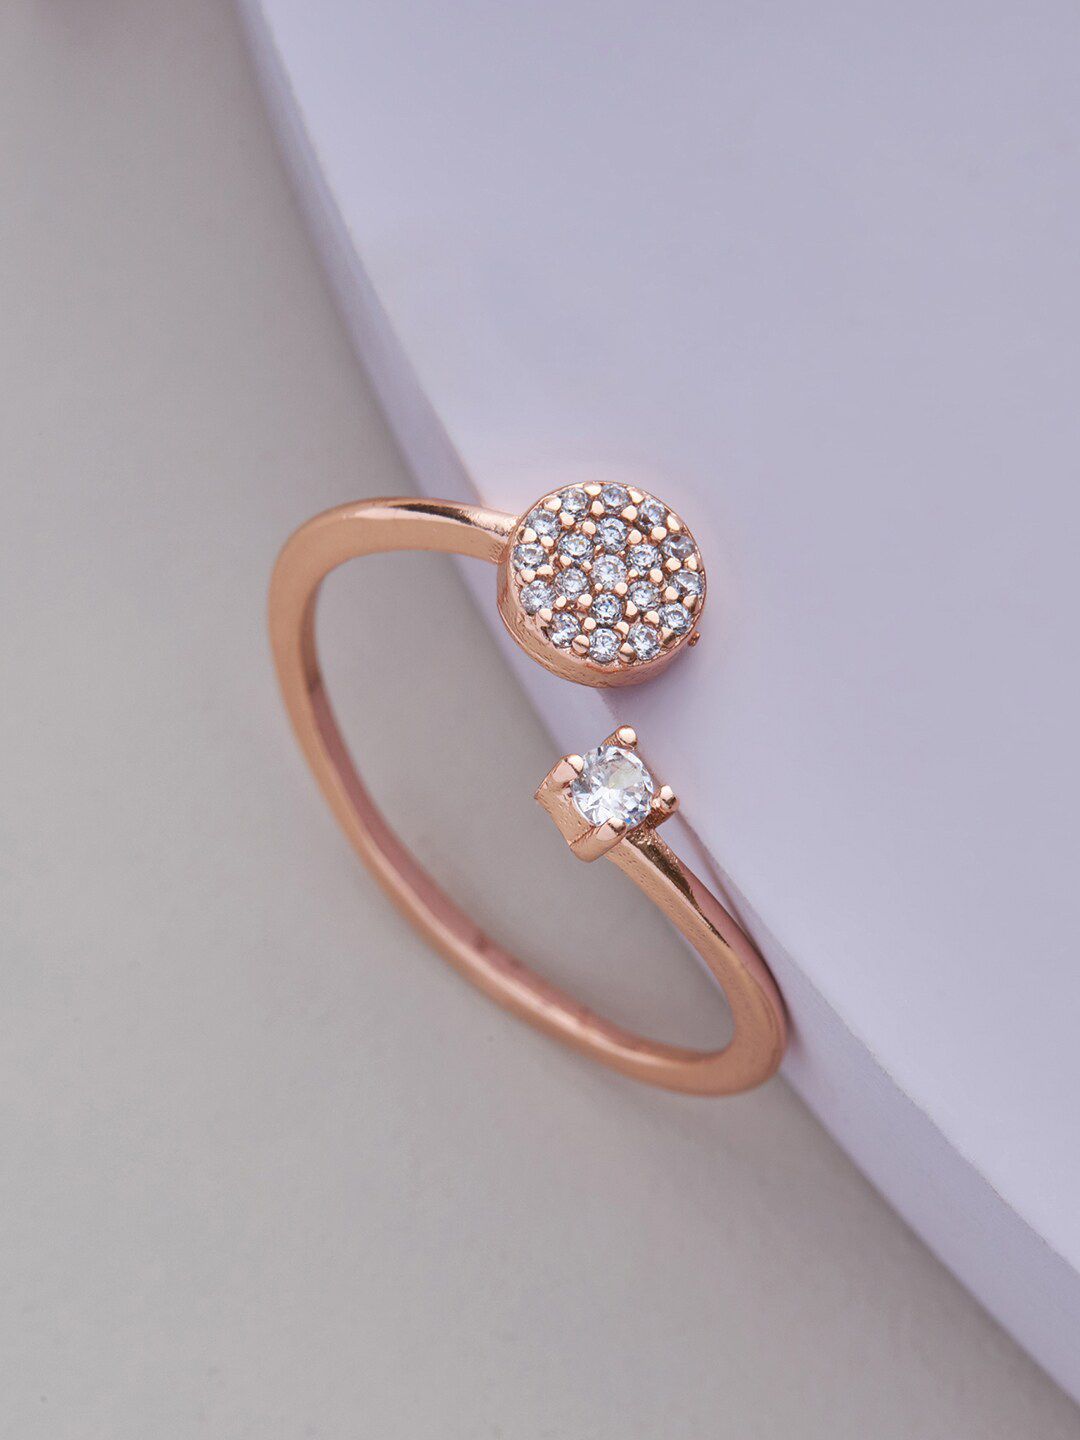 Kushal's Fashion Jewellery Rose Gold-Plated White CZ-Studded Adjustable Finger Ring Price in India